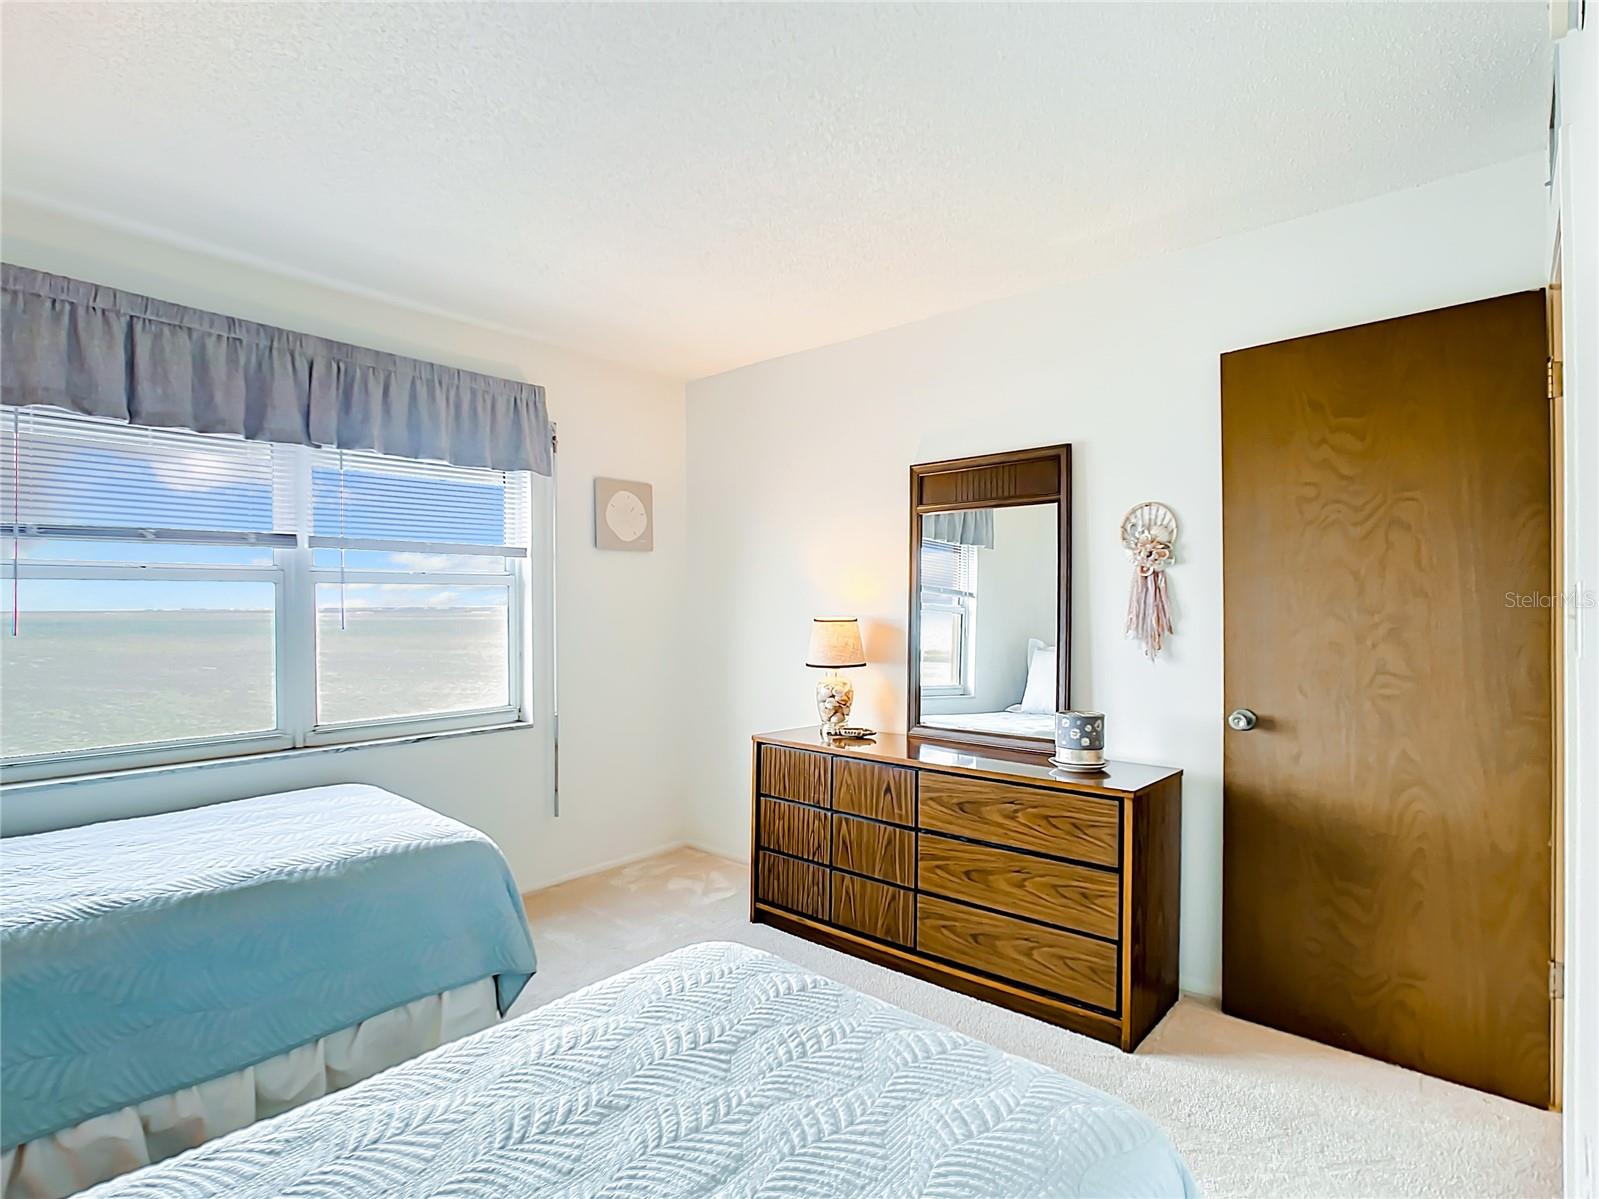 Second bedroom with views of St. Josephs Sound and N. Honeymoon